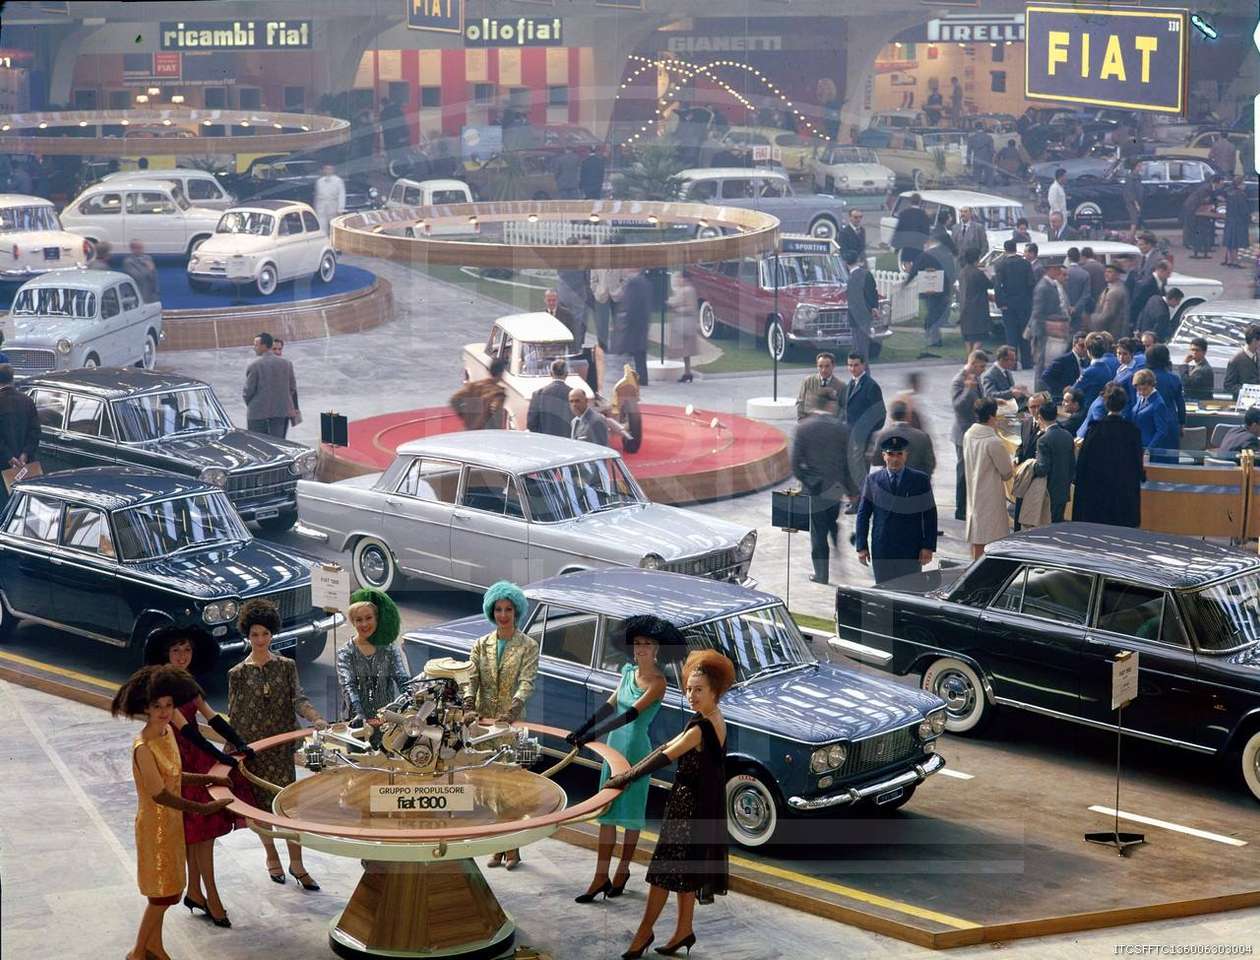 1961 International Motor Show in Turin, Fiat 1300- online puzzle